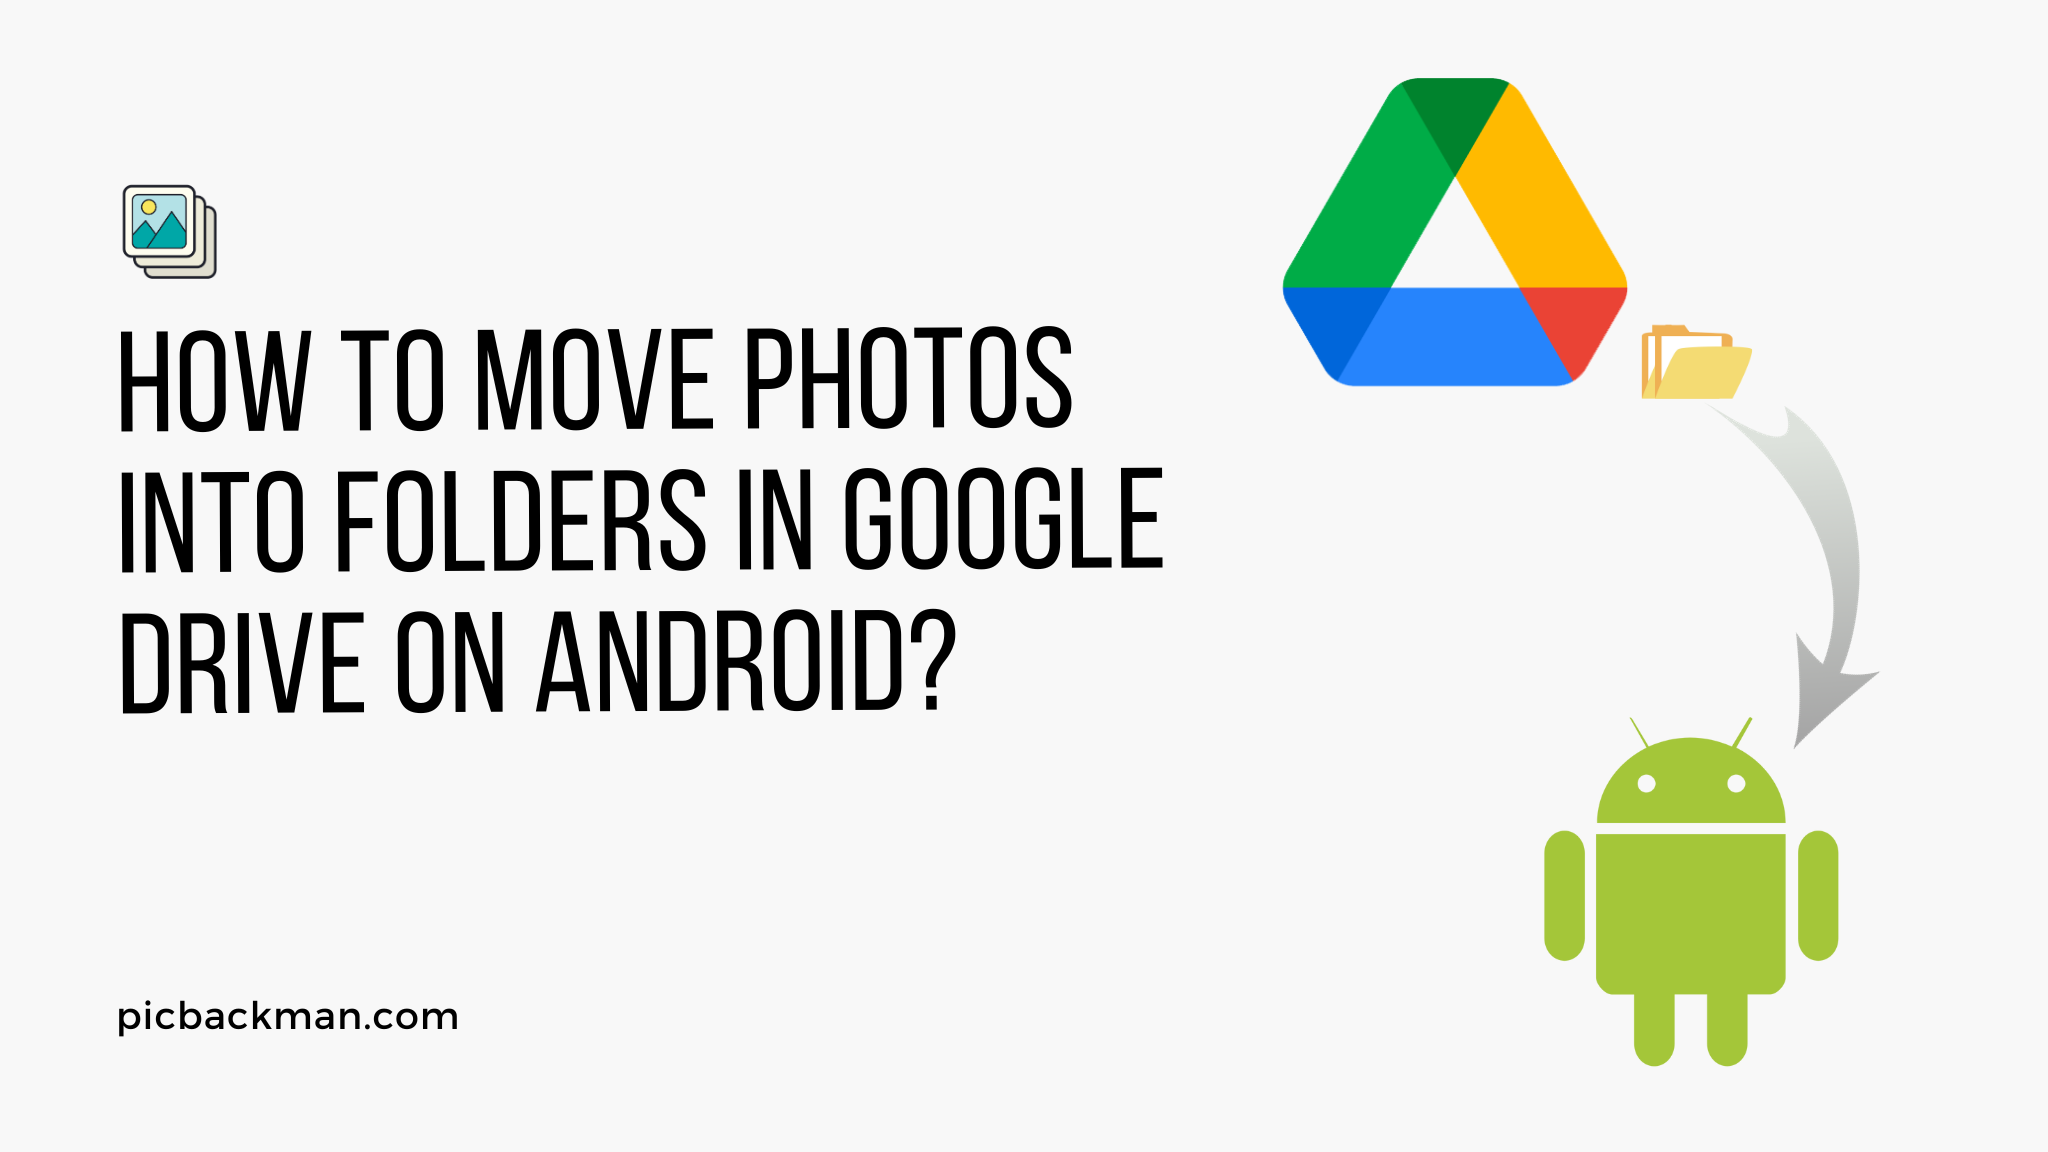 How to Move Photos into Folders in Google Drive on Android?